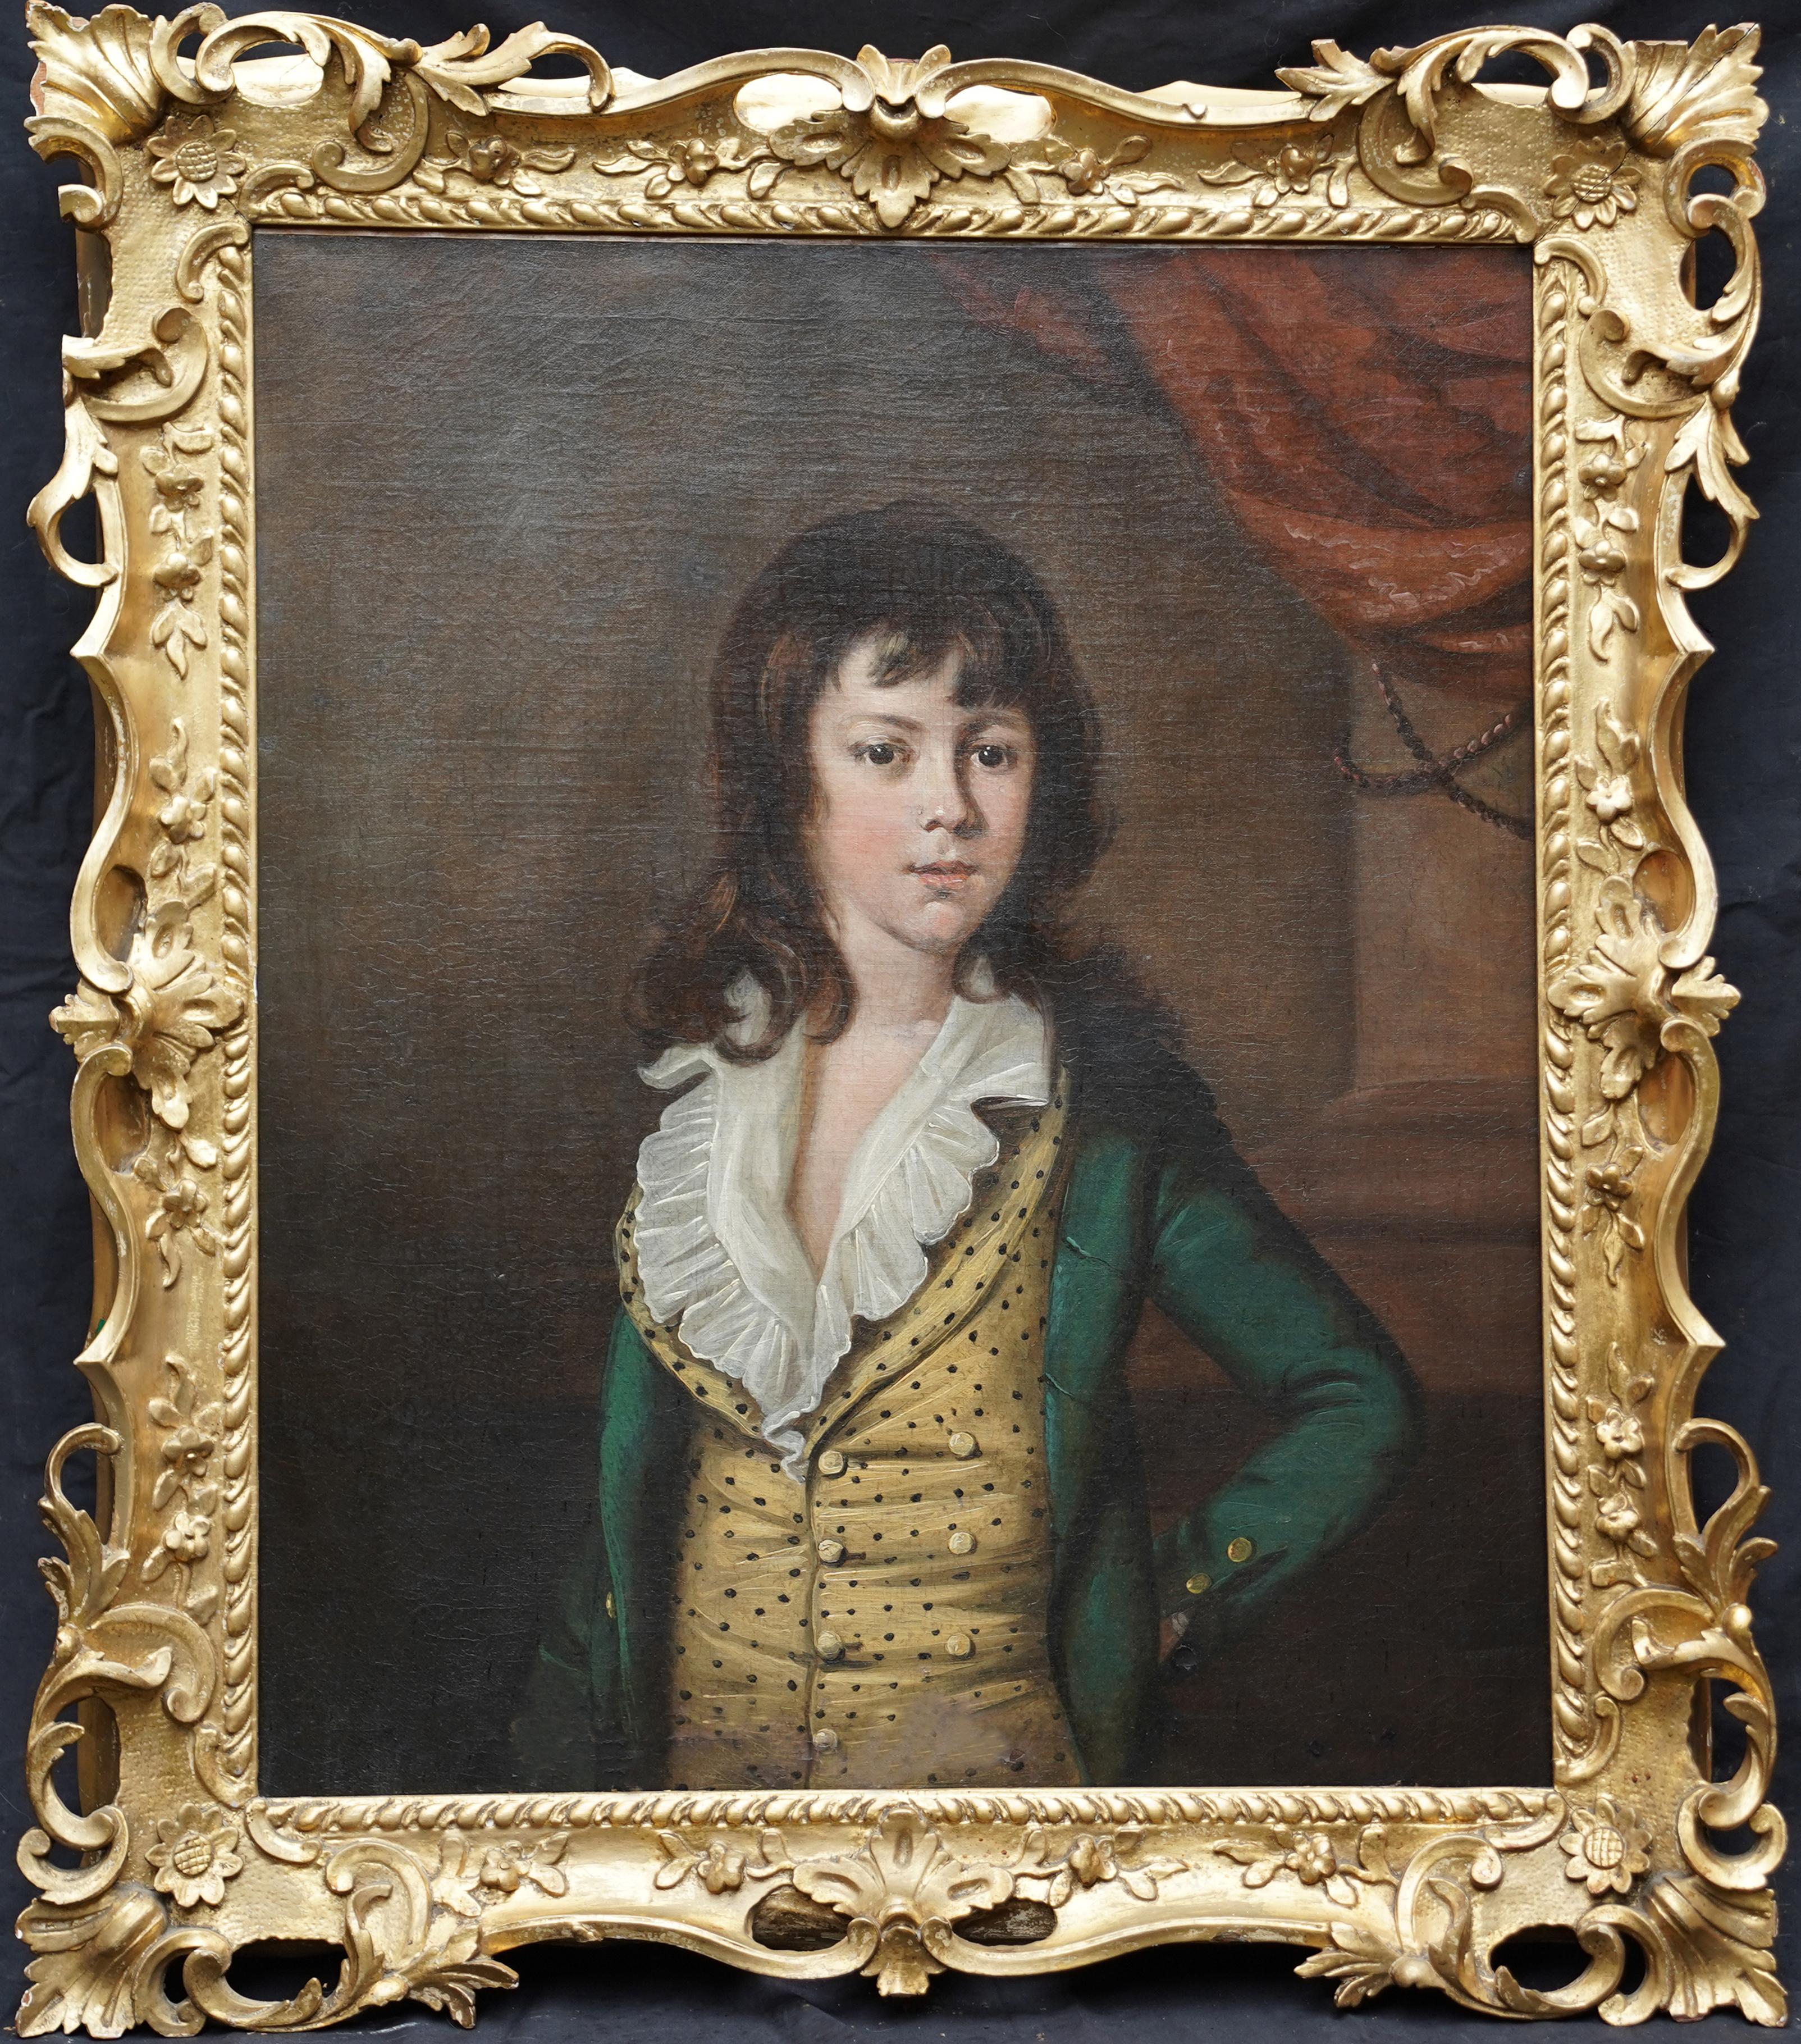 This gorgeous 18th century British portrait oil painting is by Old Master artist John Berridge. Painted in 1769 it is a half length portrait of a dark haired boy in sumptuous yellow waistcoat and ruffled white collar under a green jacket. He is